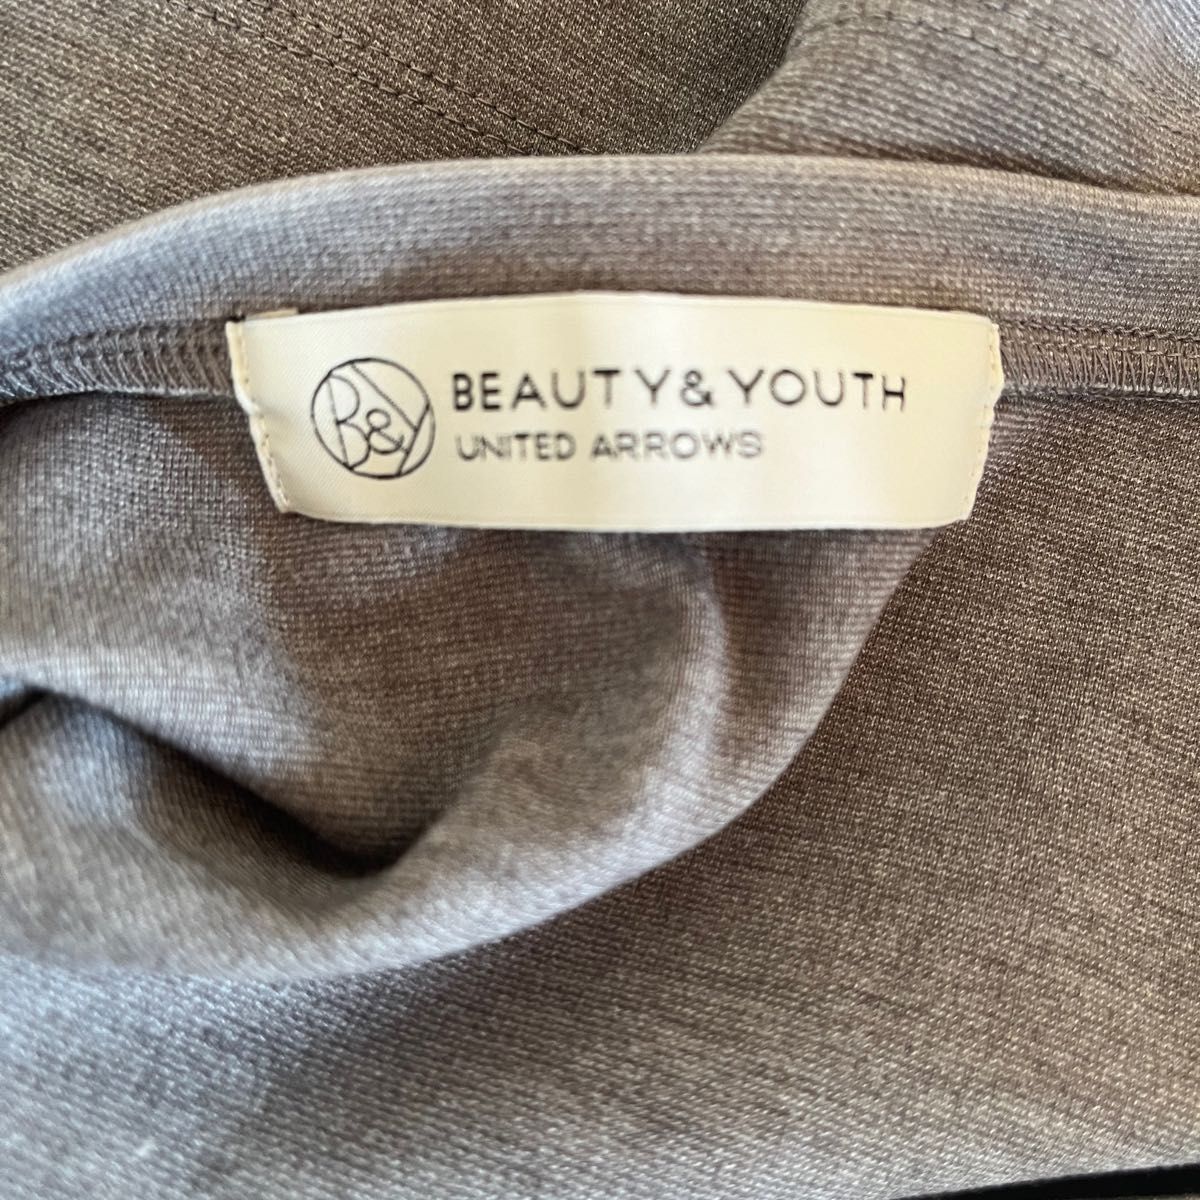 BEAUTY&YOUTH UNITED ARROWS トップス 無地 トップス